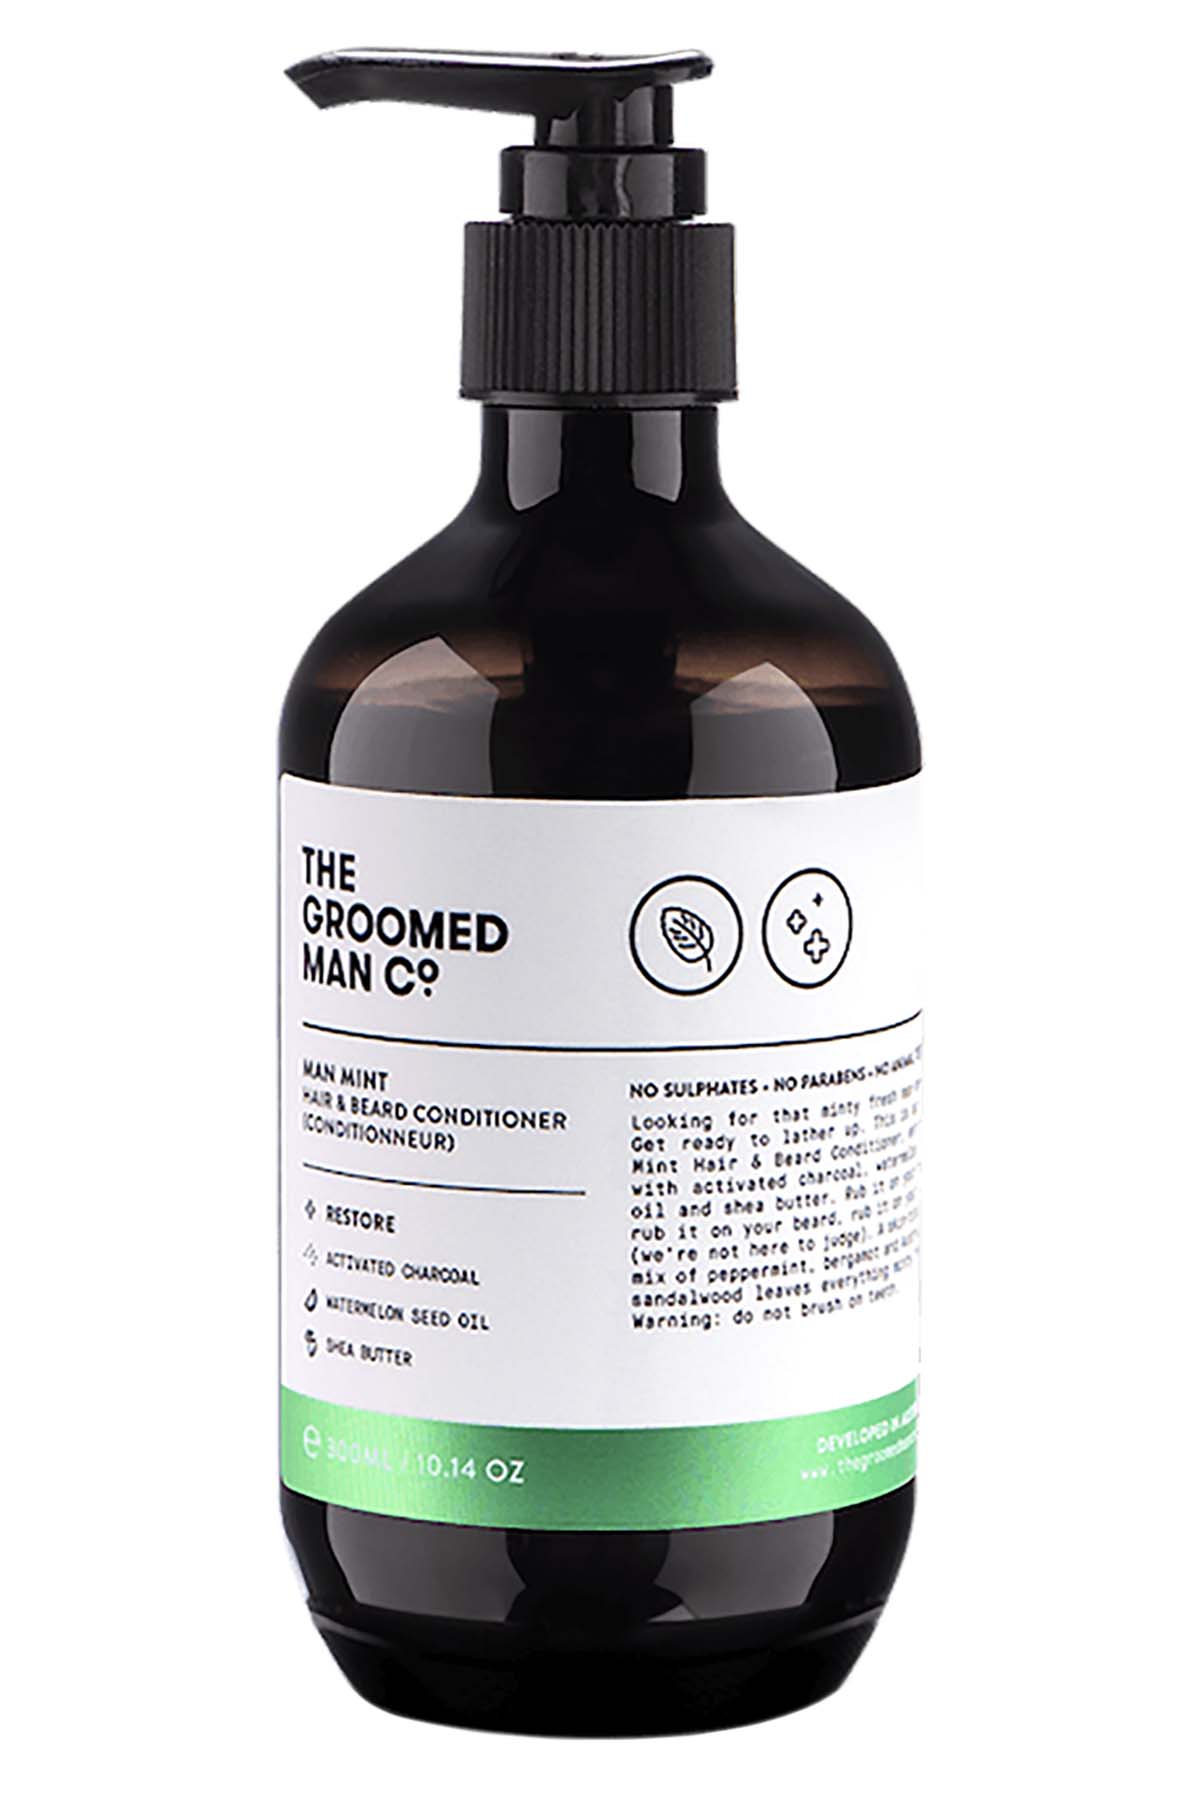 The Groomed Man Co. Man Mint Conditioner